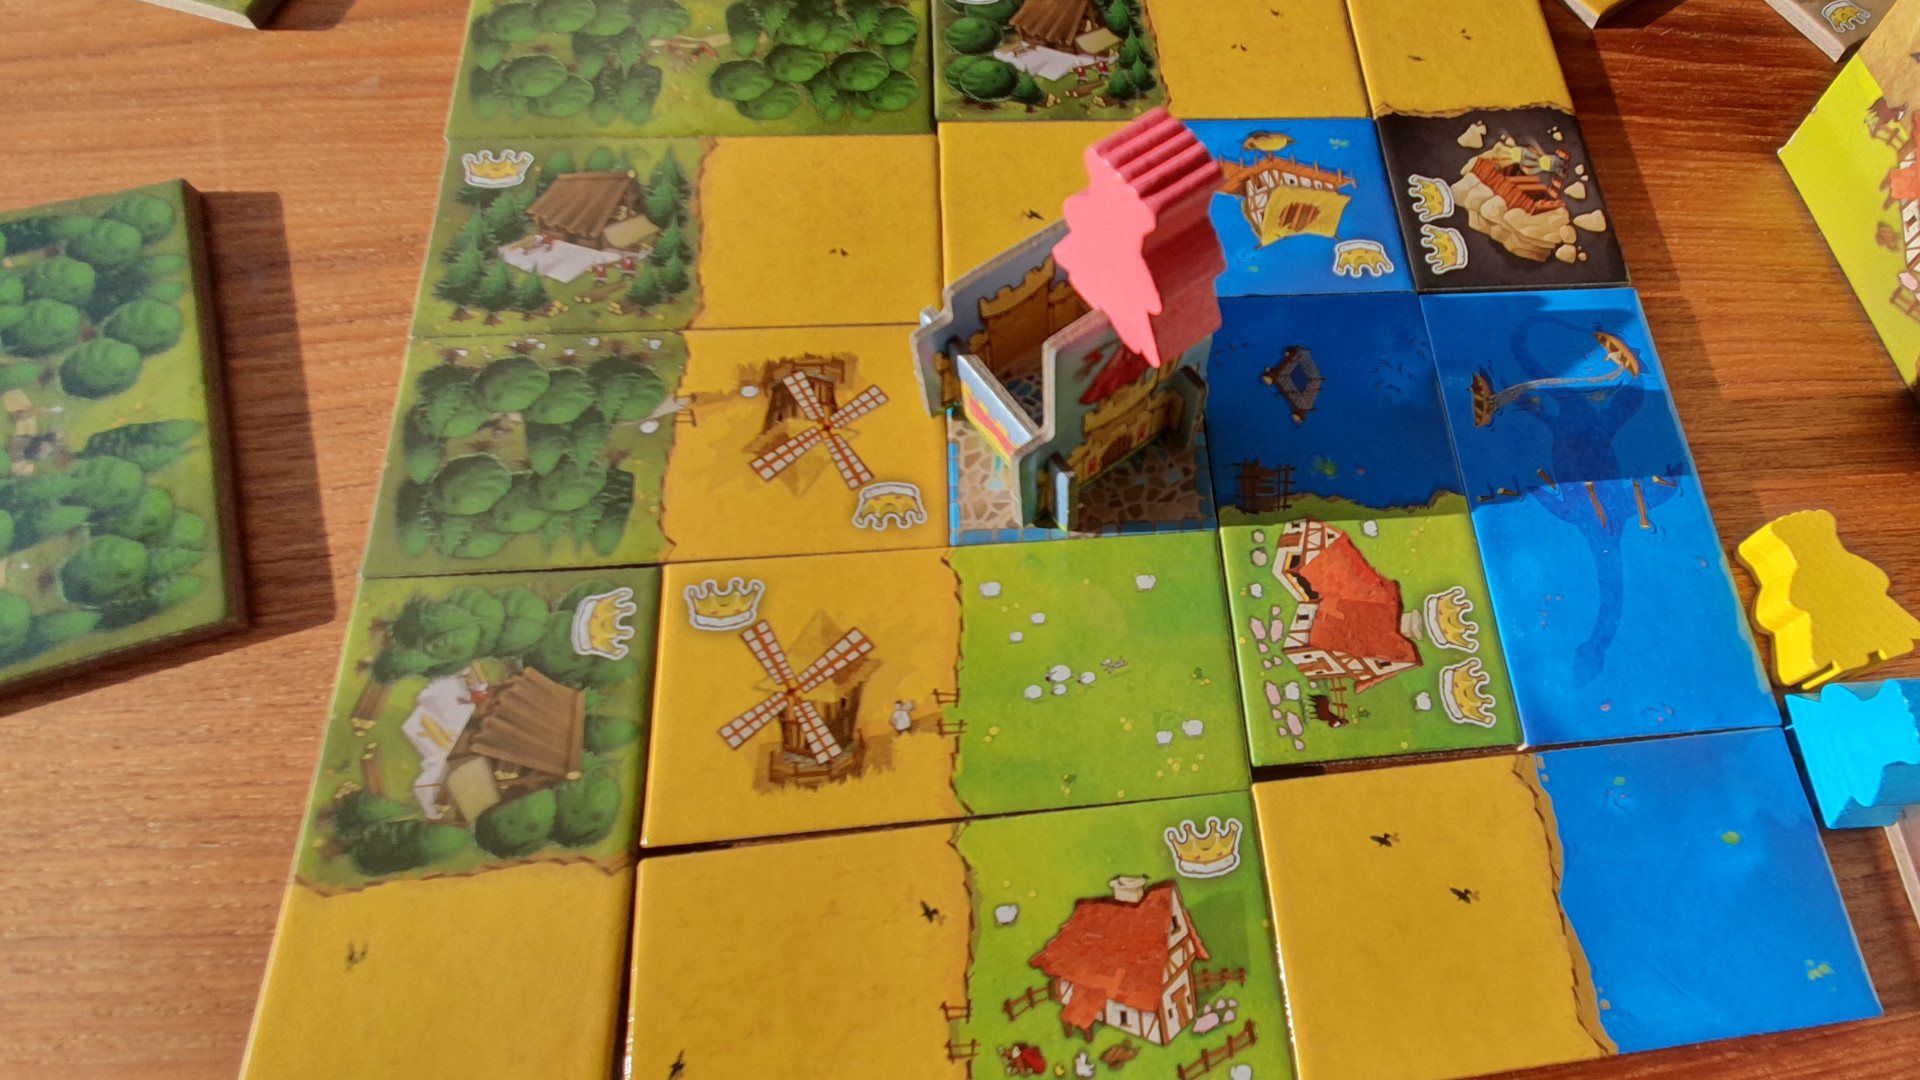 Kingdomino review - photo of a complete kingdom made from landscape domino tiles, in the center is cardboard castle, with a pink meeple balanced on top